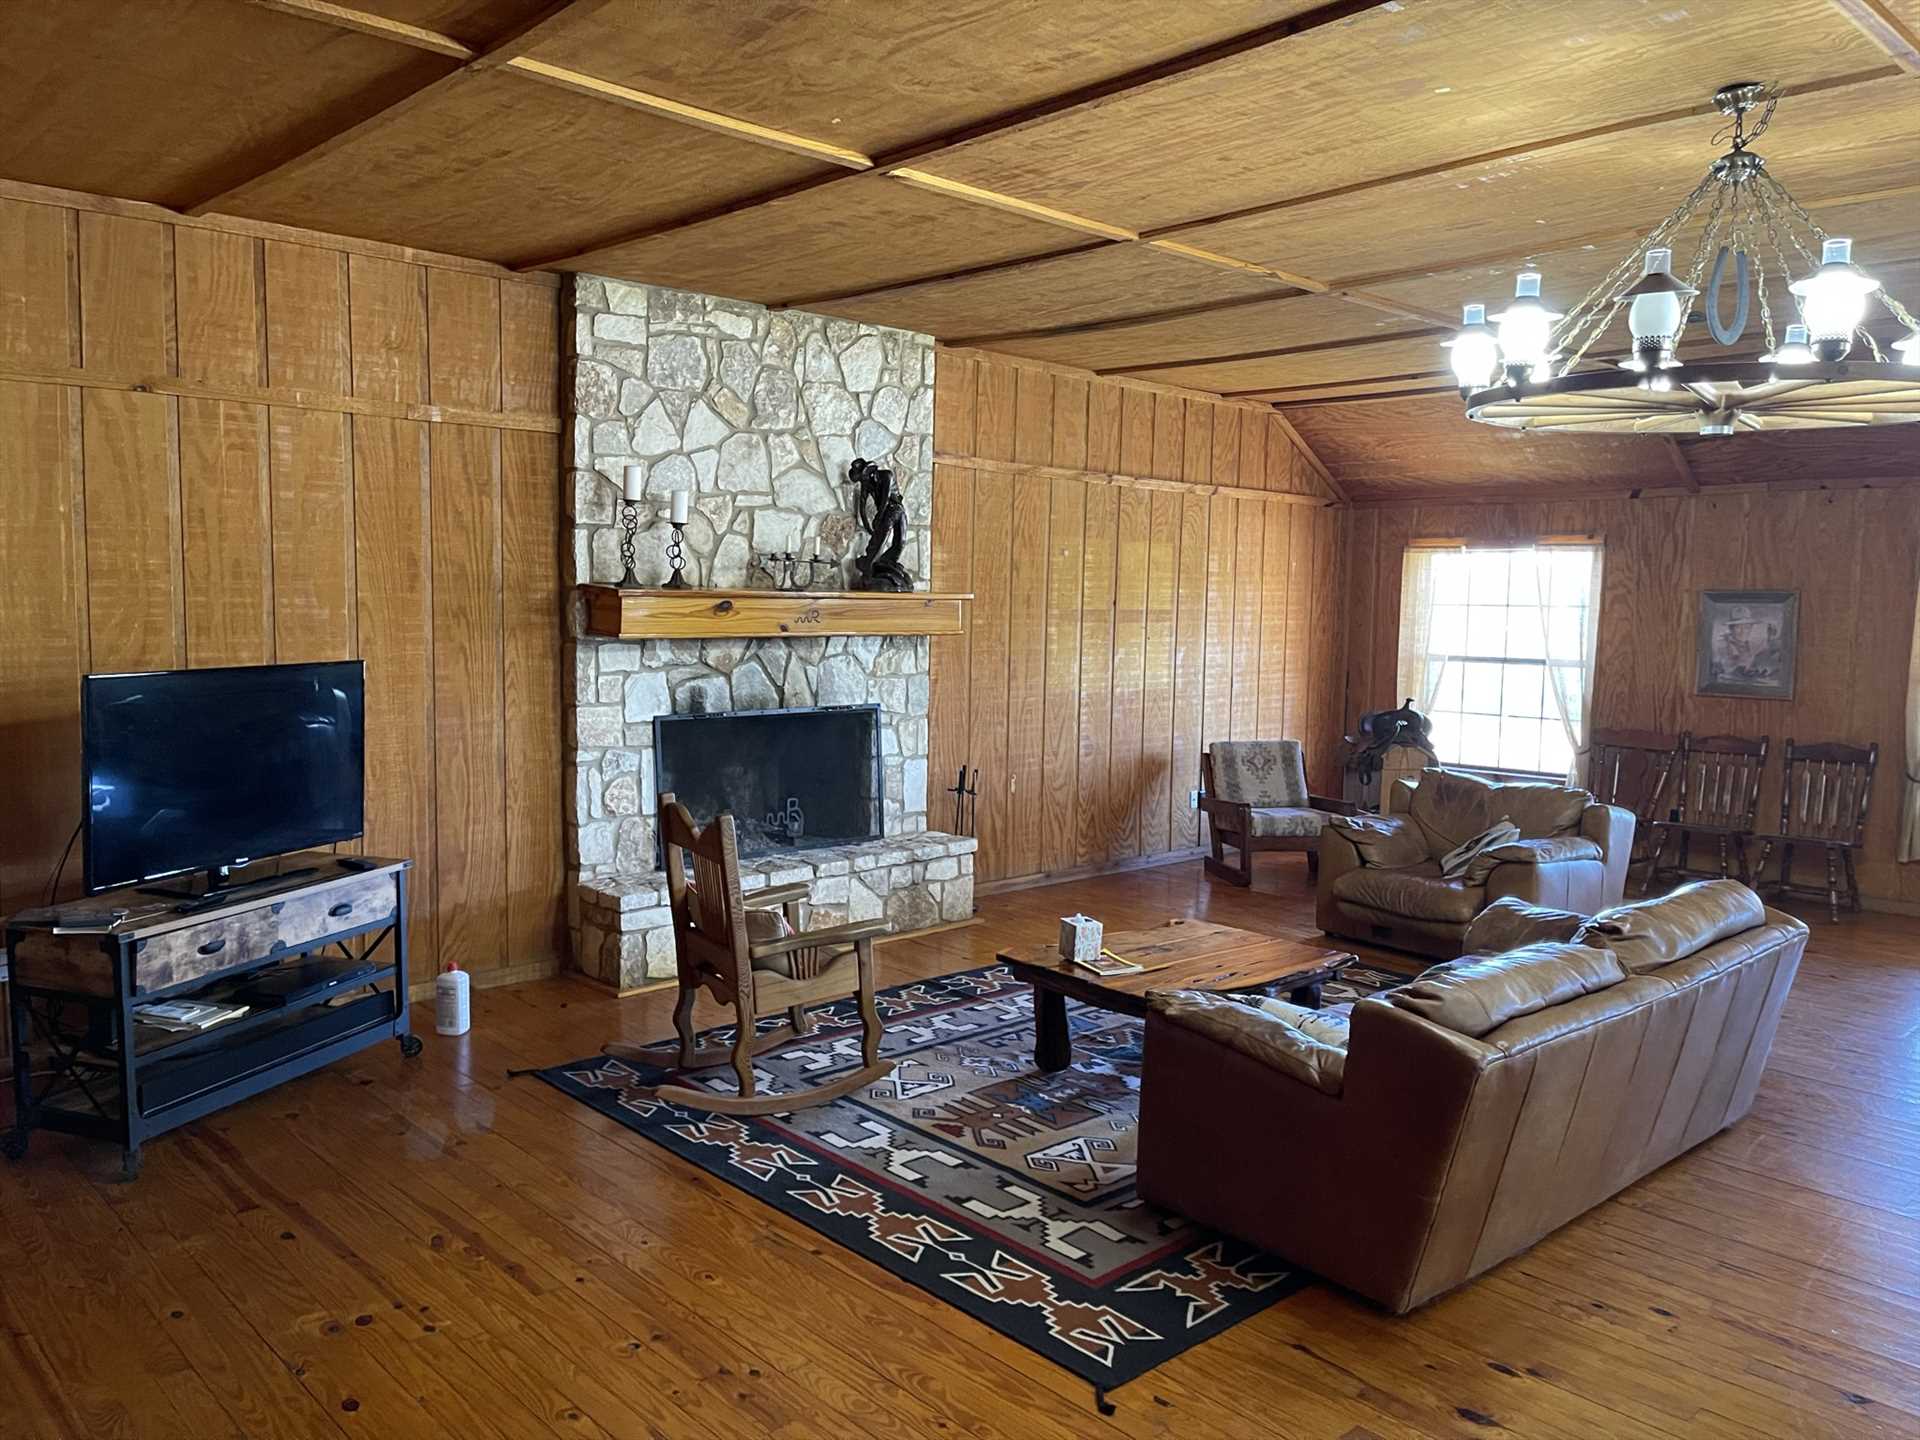                                                 Toast your toes on chilly nights in front of the Lodge's fireplace, watch TV, or just stretch out in luxurious comfort!